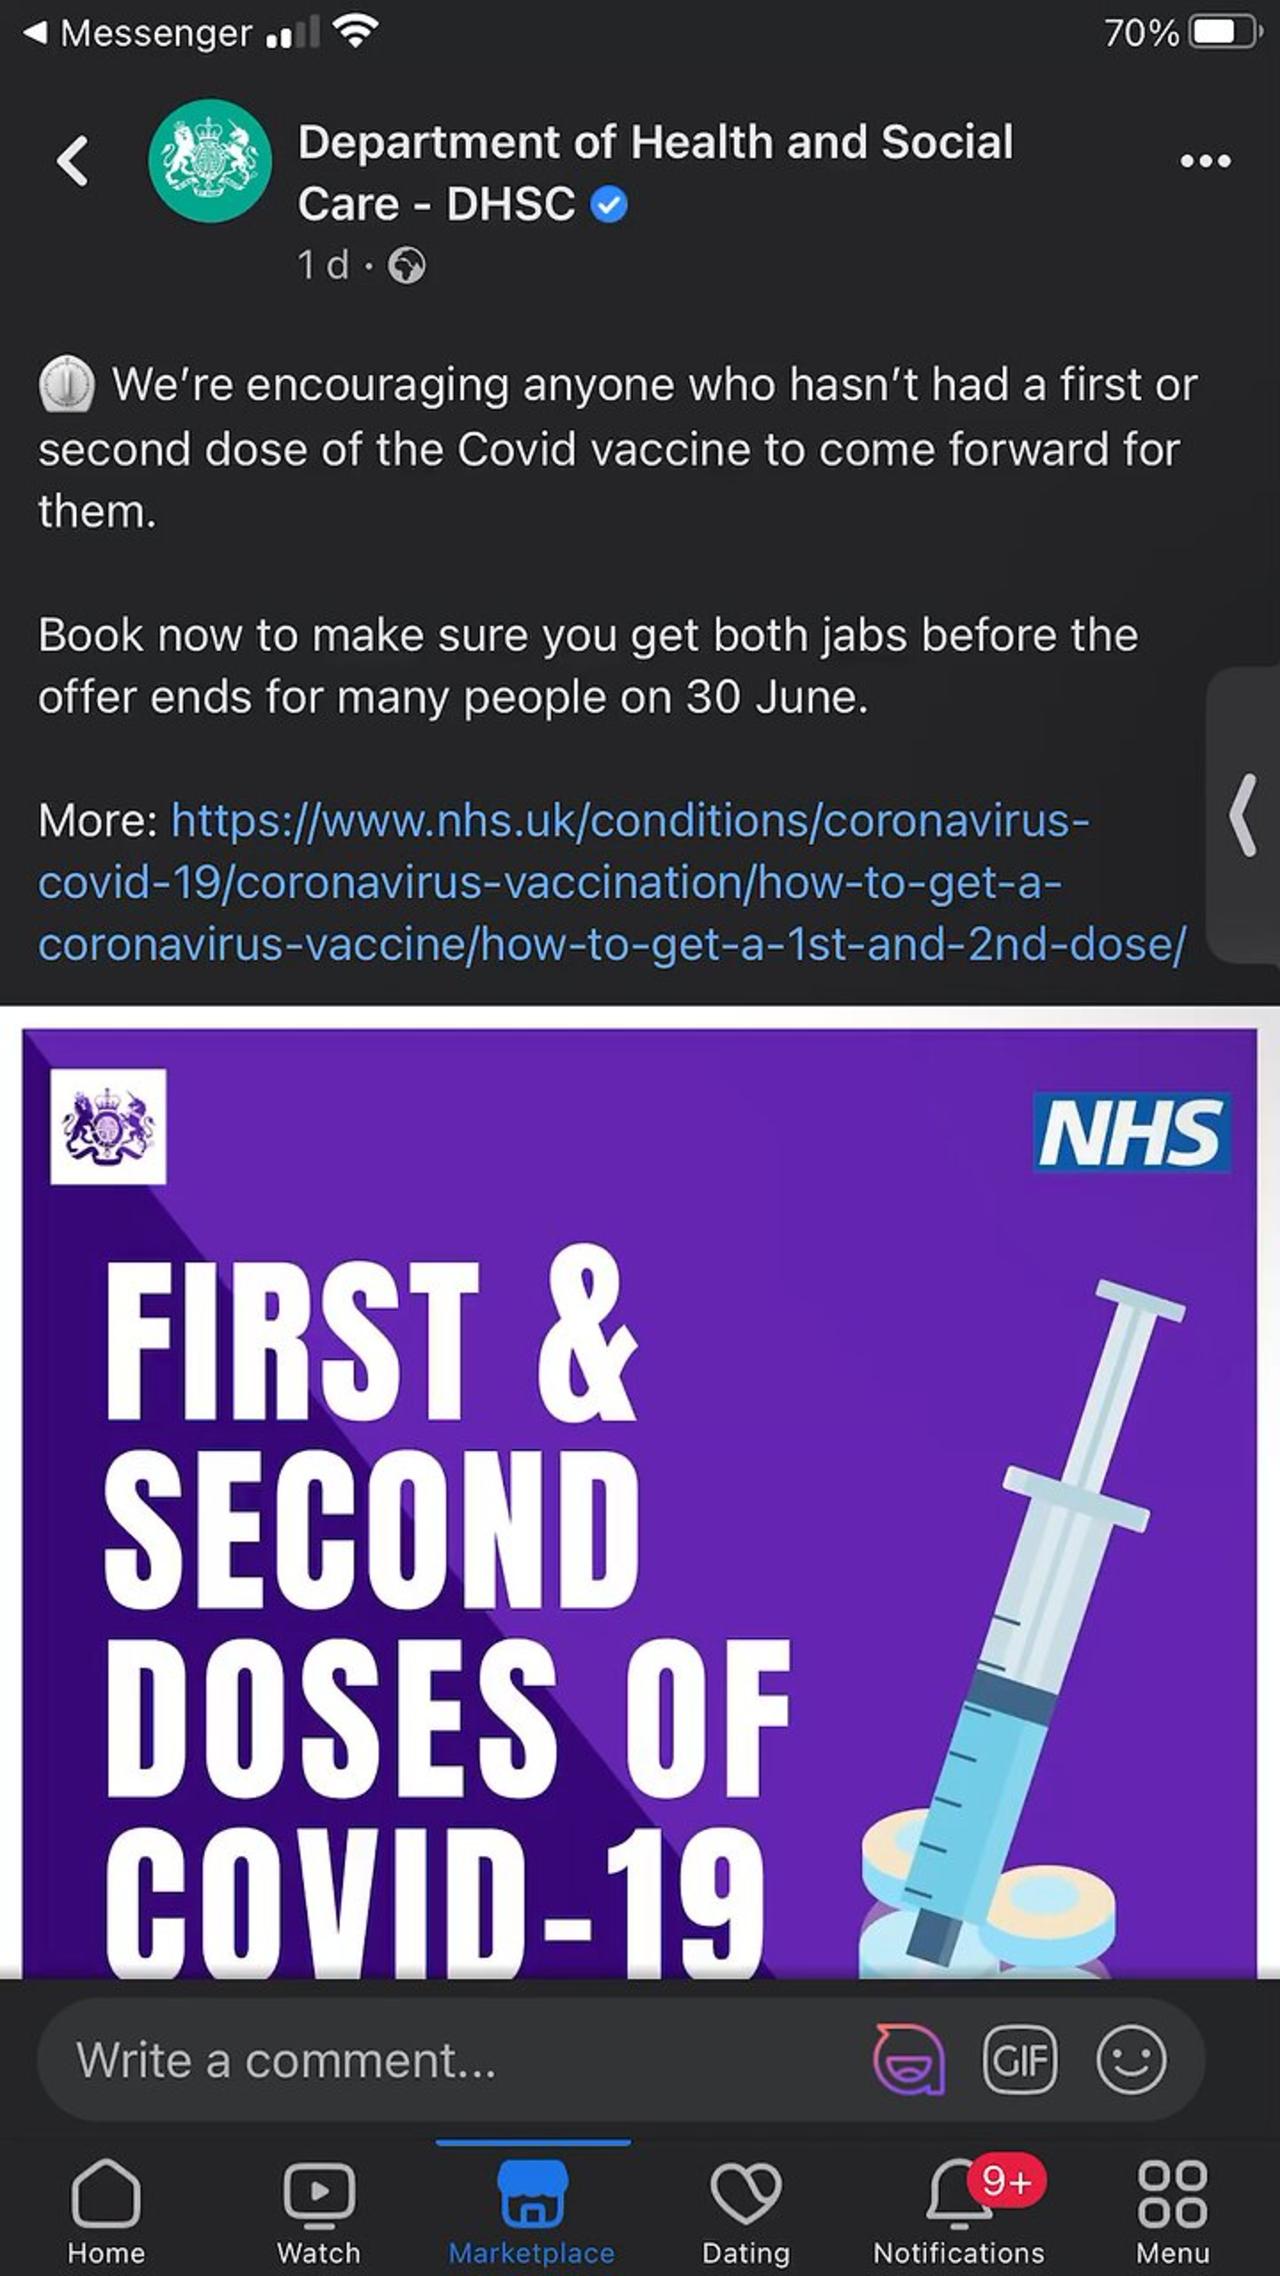 DHSC : Department of Health and Social Care is inviting 5 y and up: 1 st and 2 nd Covid vaccines